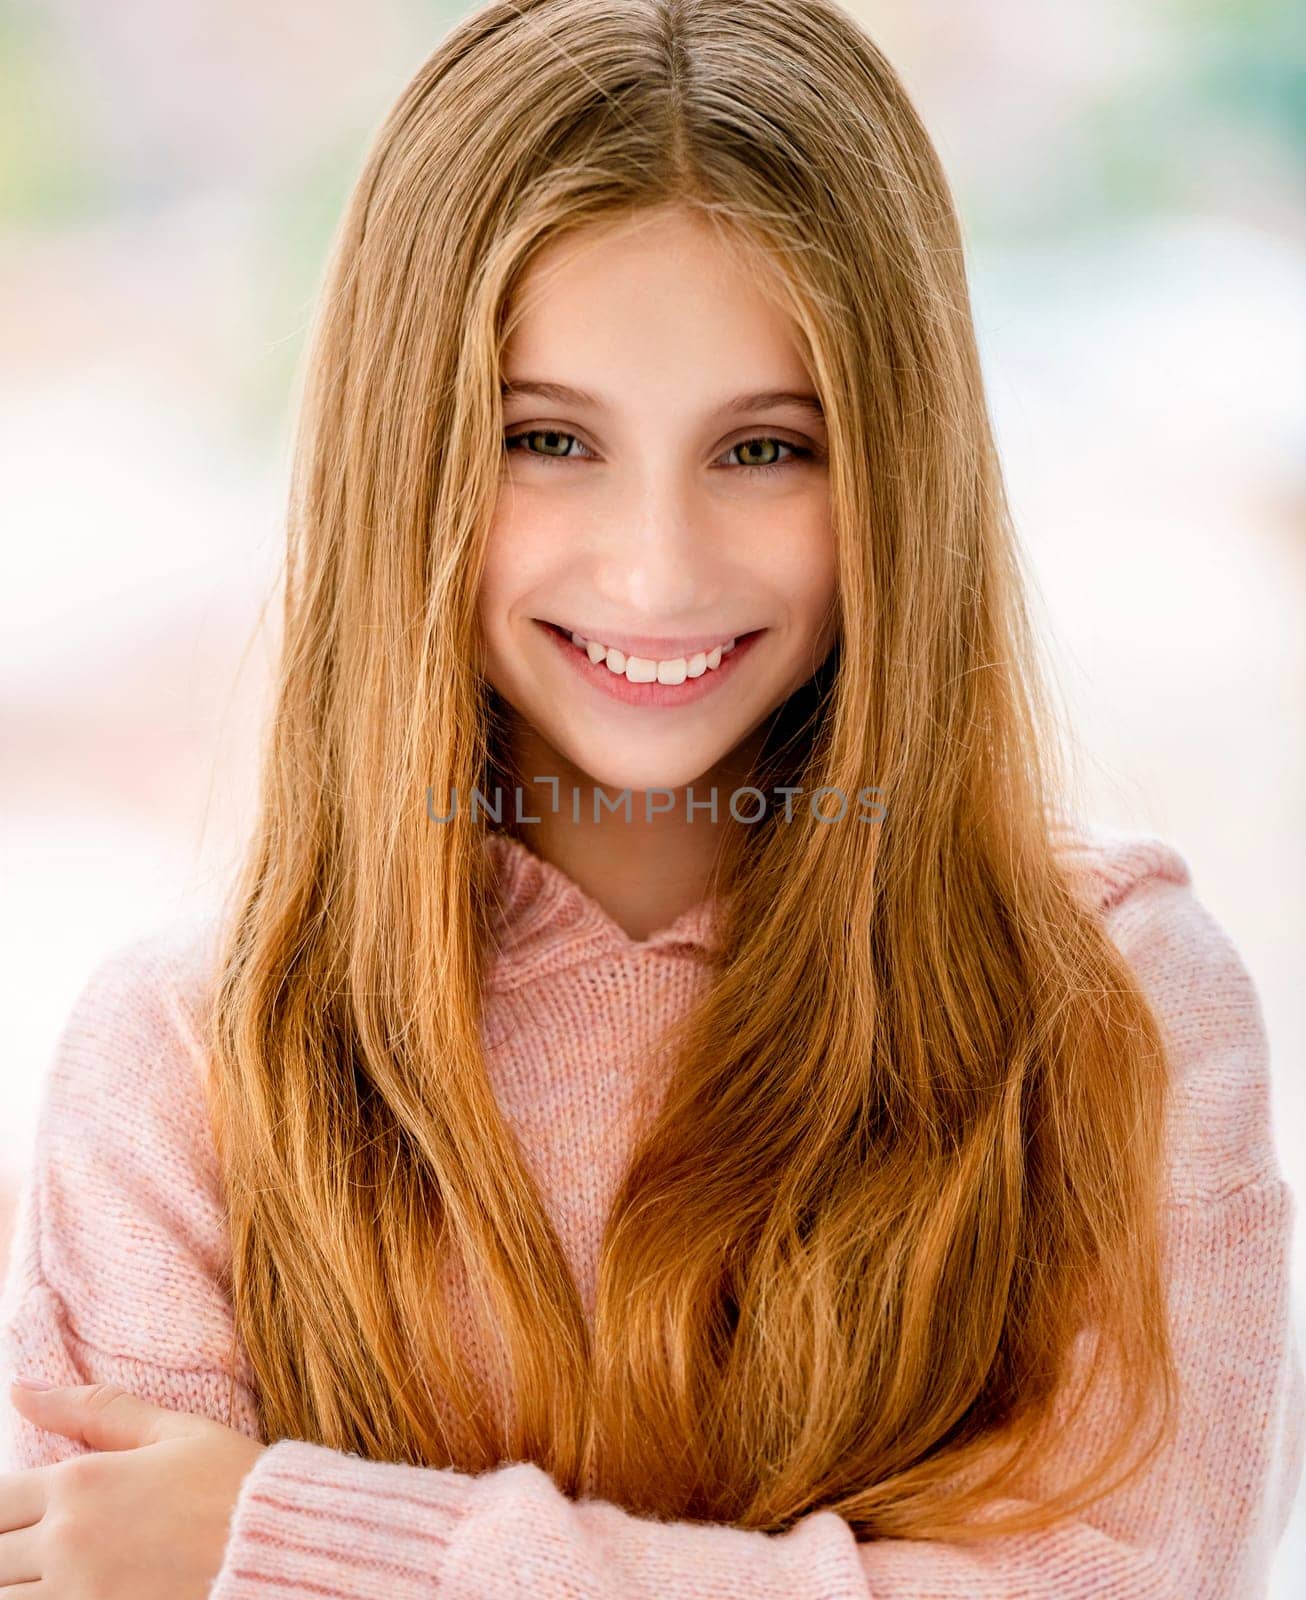 Cute long haired teenage girl smiling to camera